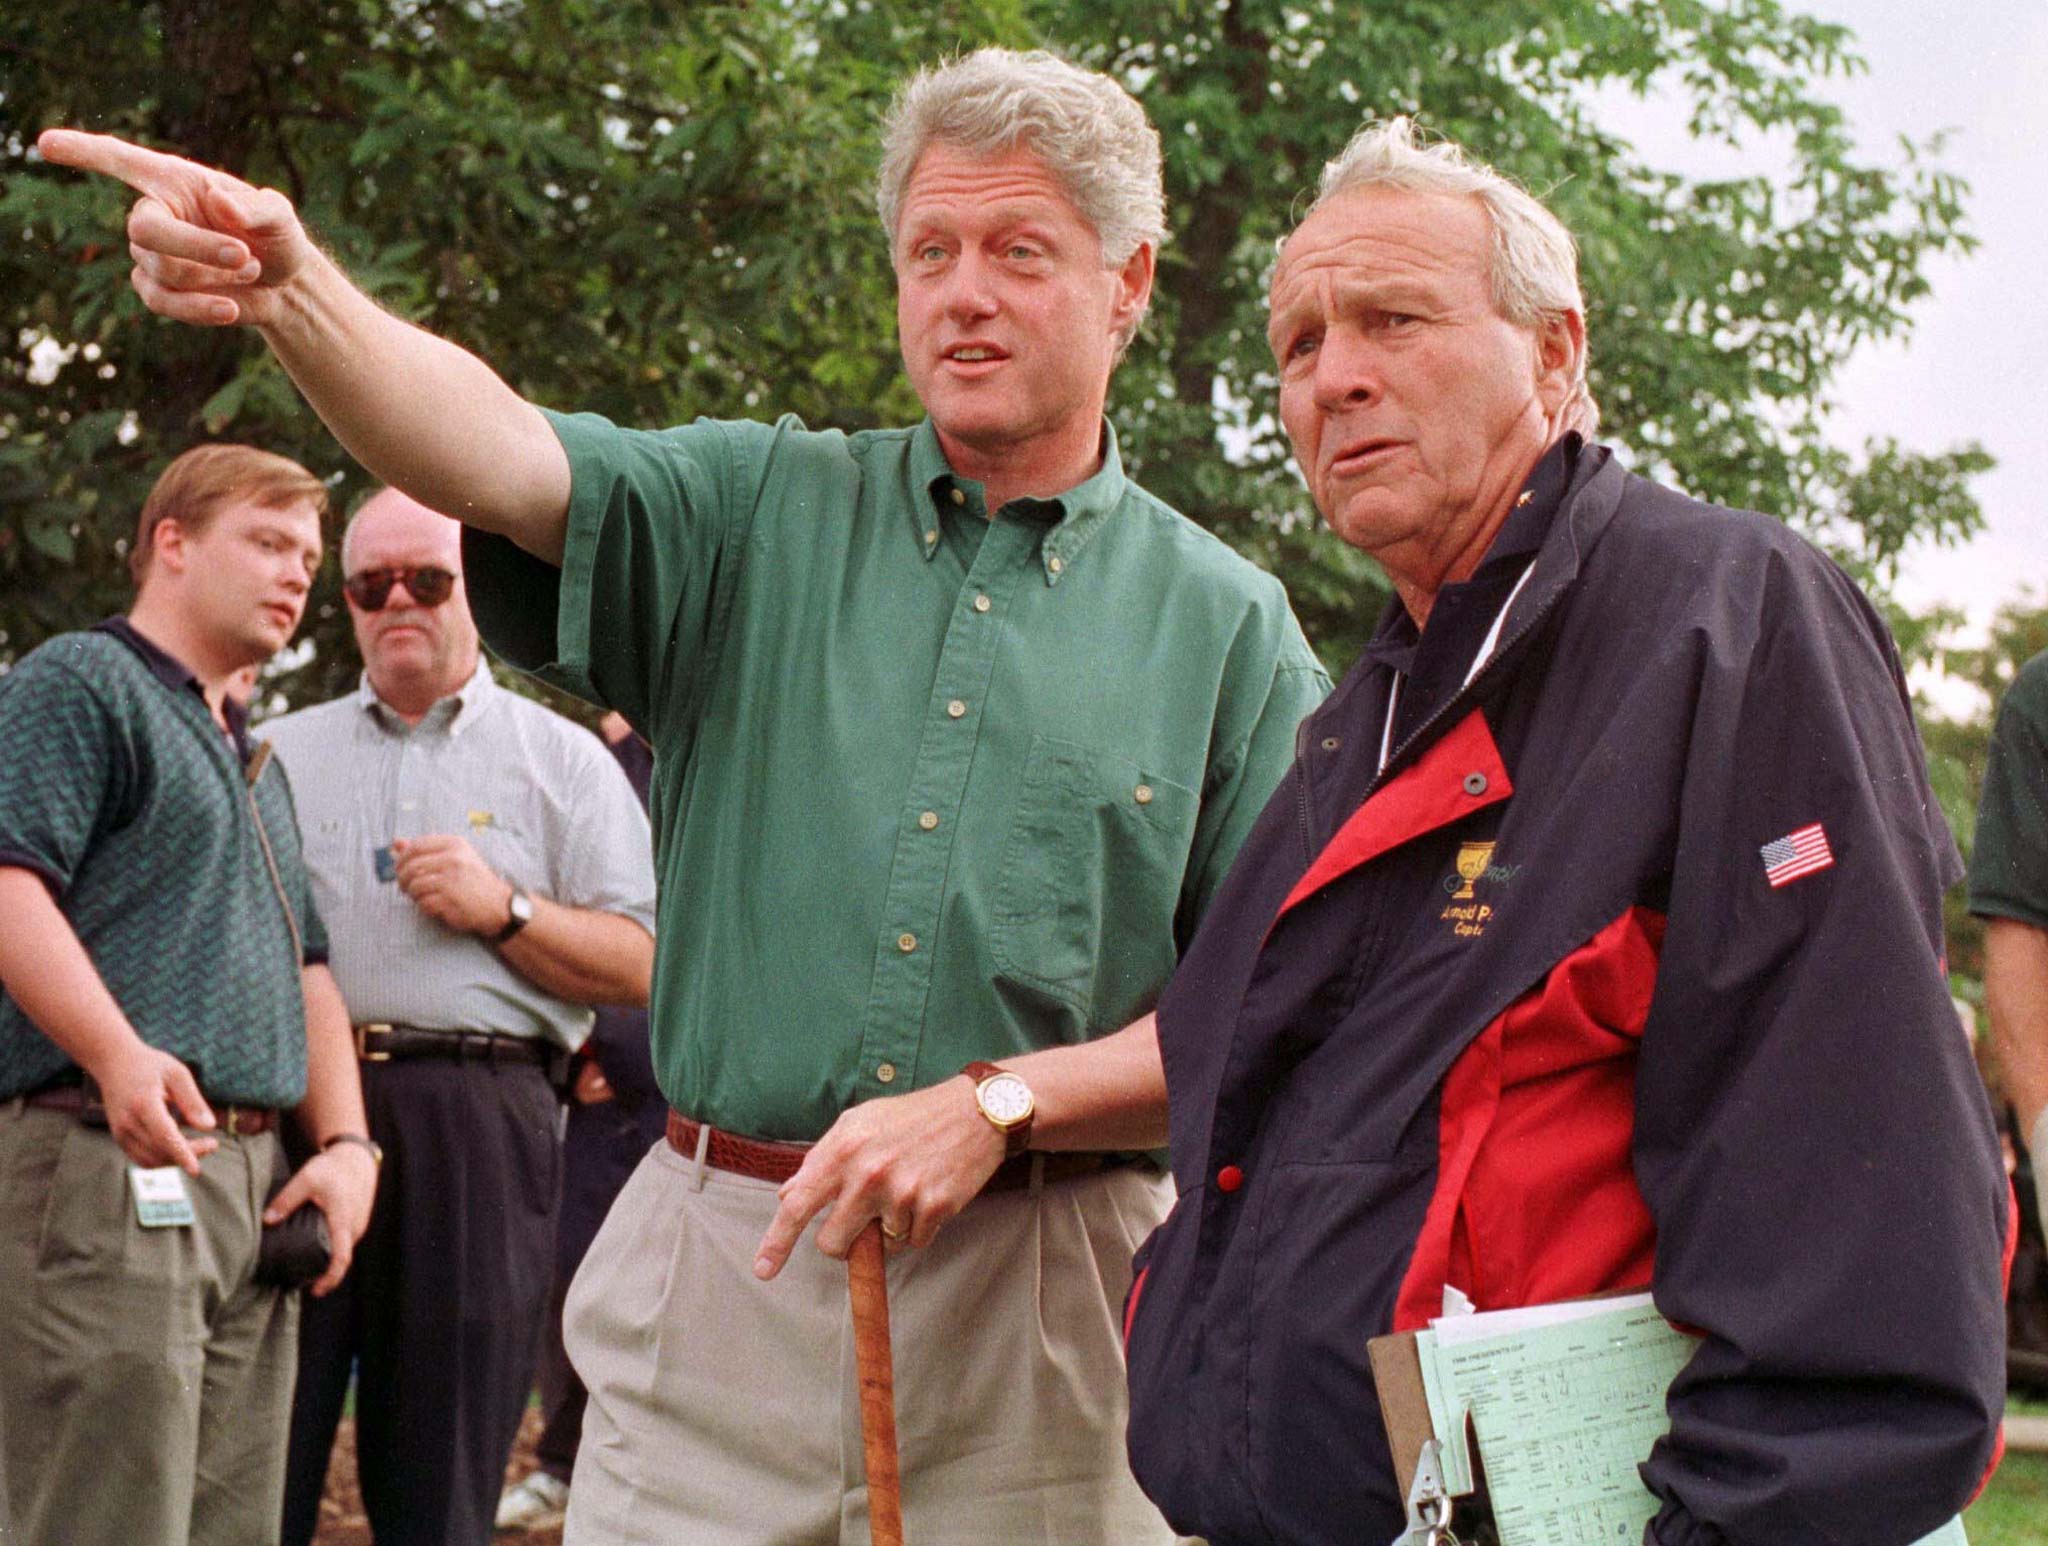 PRESIDENT CLINTON AND ARNOLD PALMER AT PRESIDENTS CUP